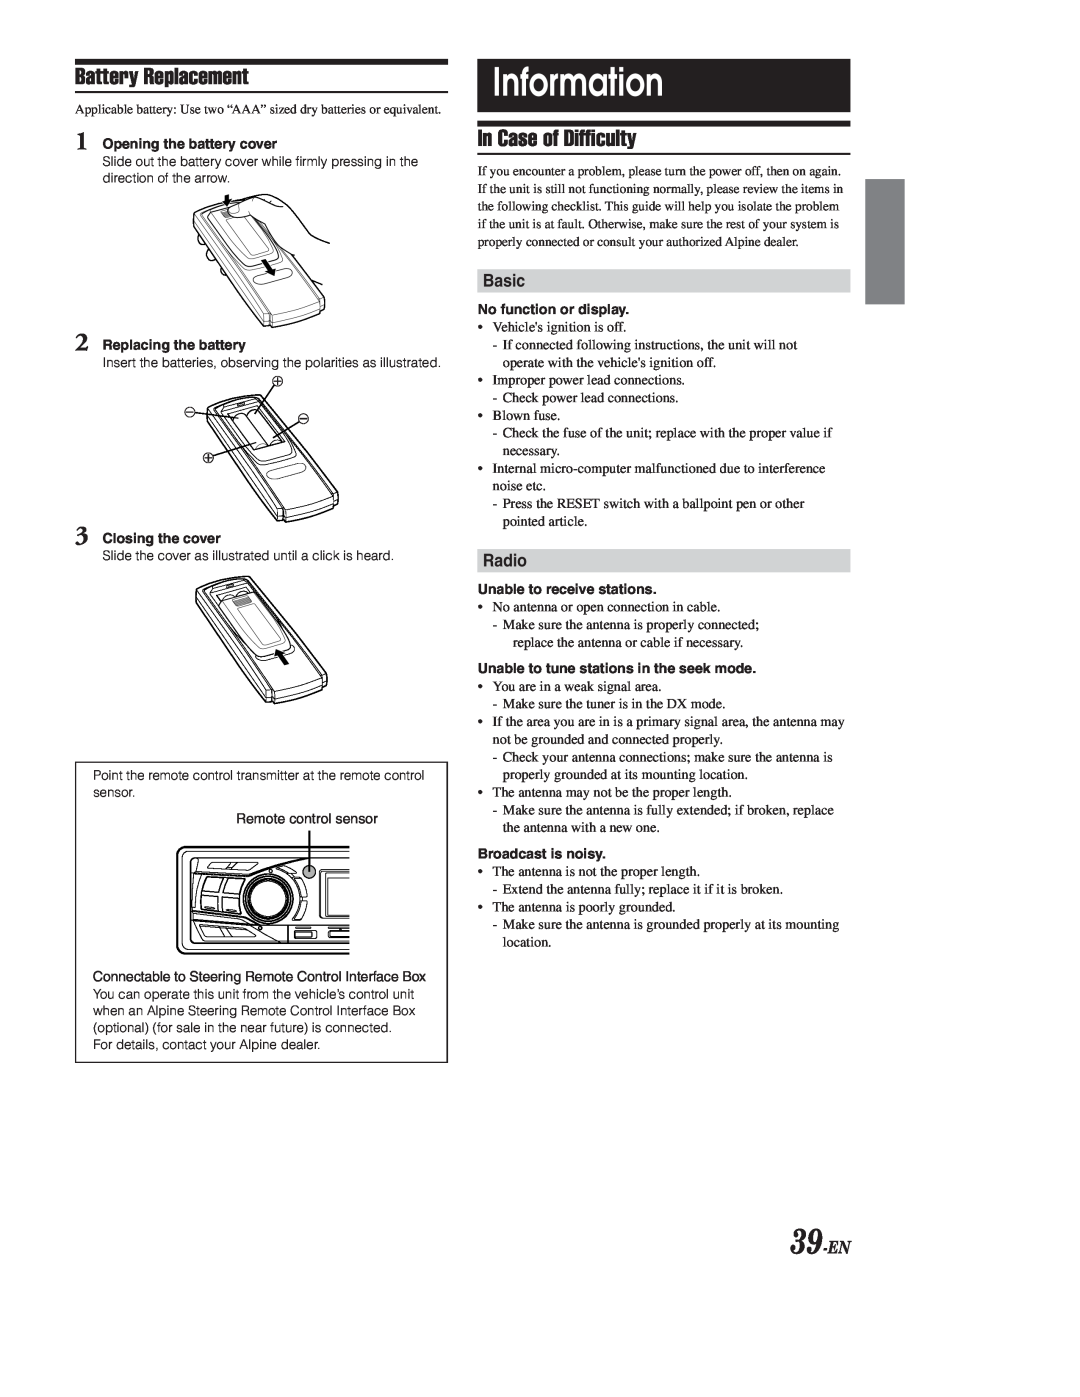 Alpine CDA-9855, CDA-9853 owner manual Information, Battery Replacement, In Case of Difficulty, Basic, Radio, 39-EN 